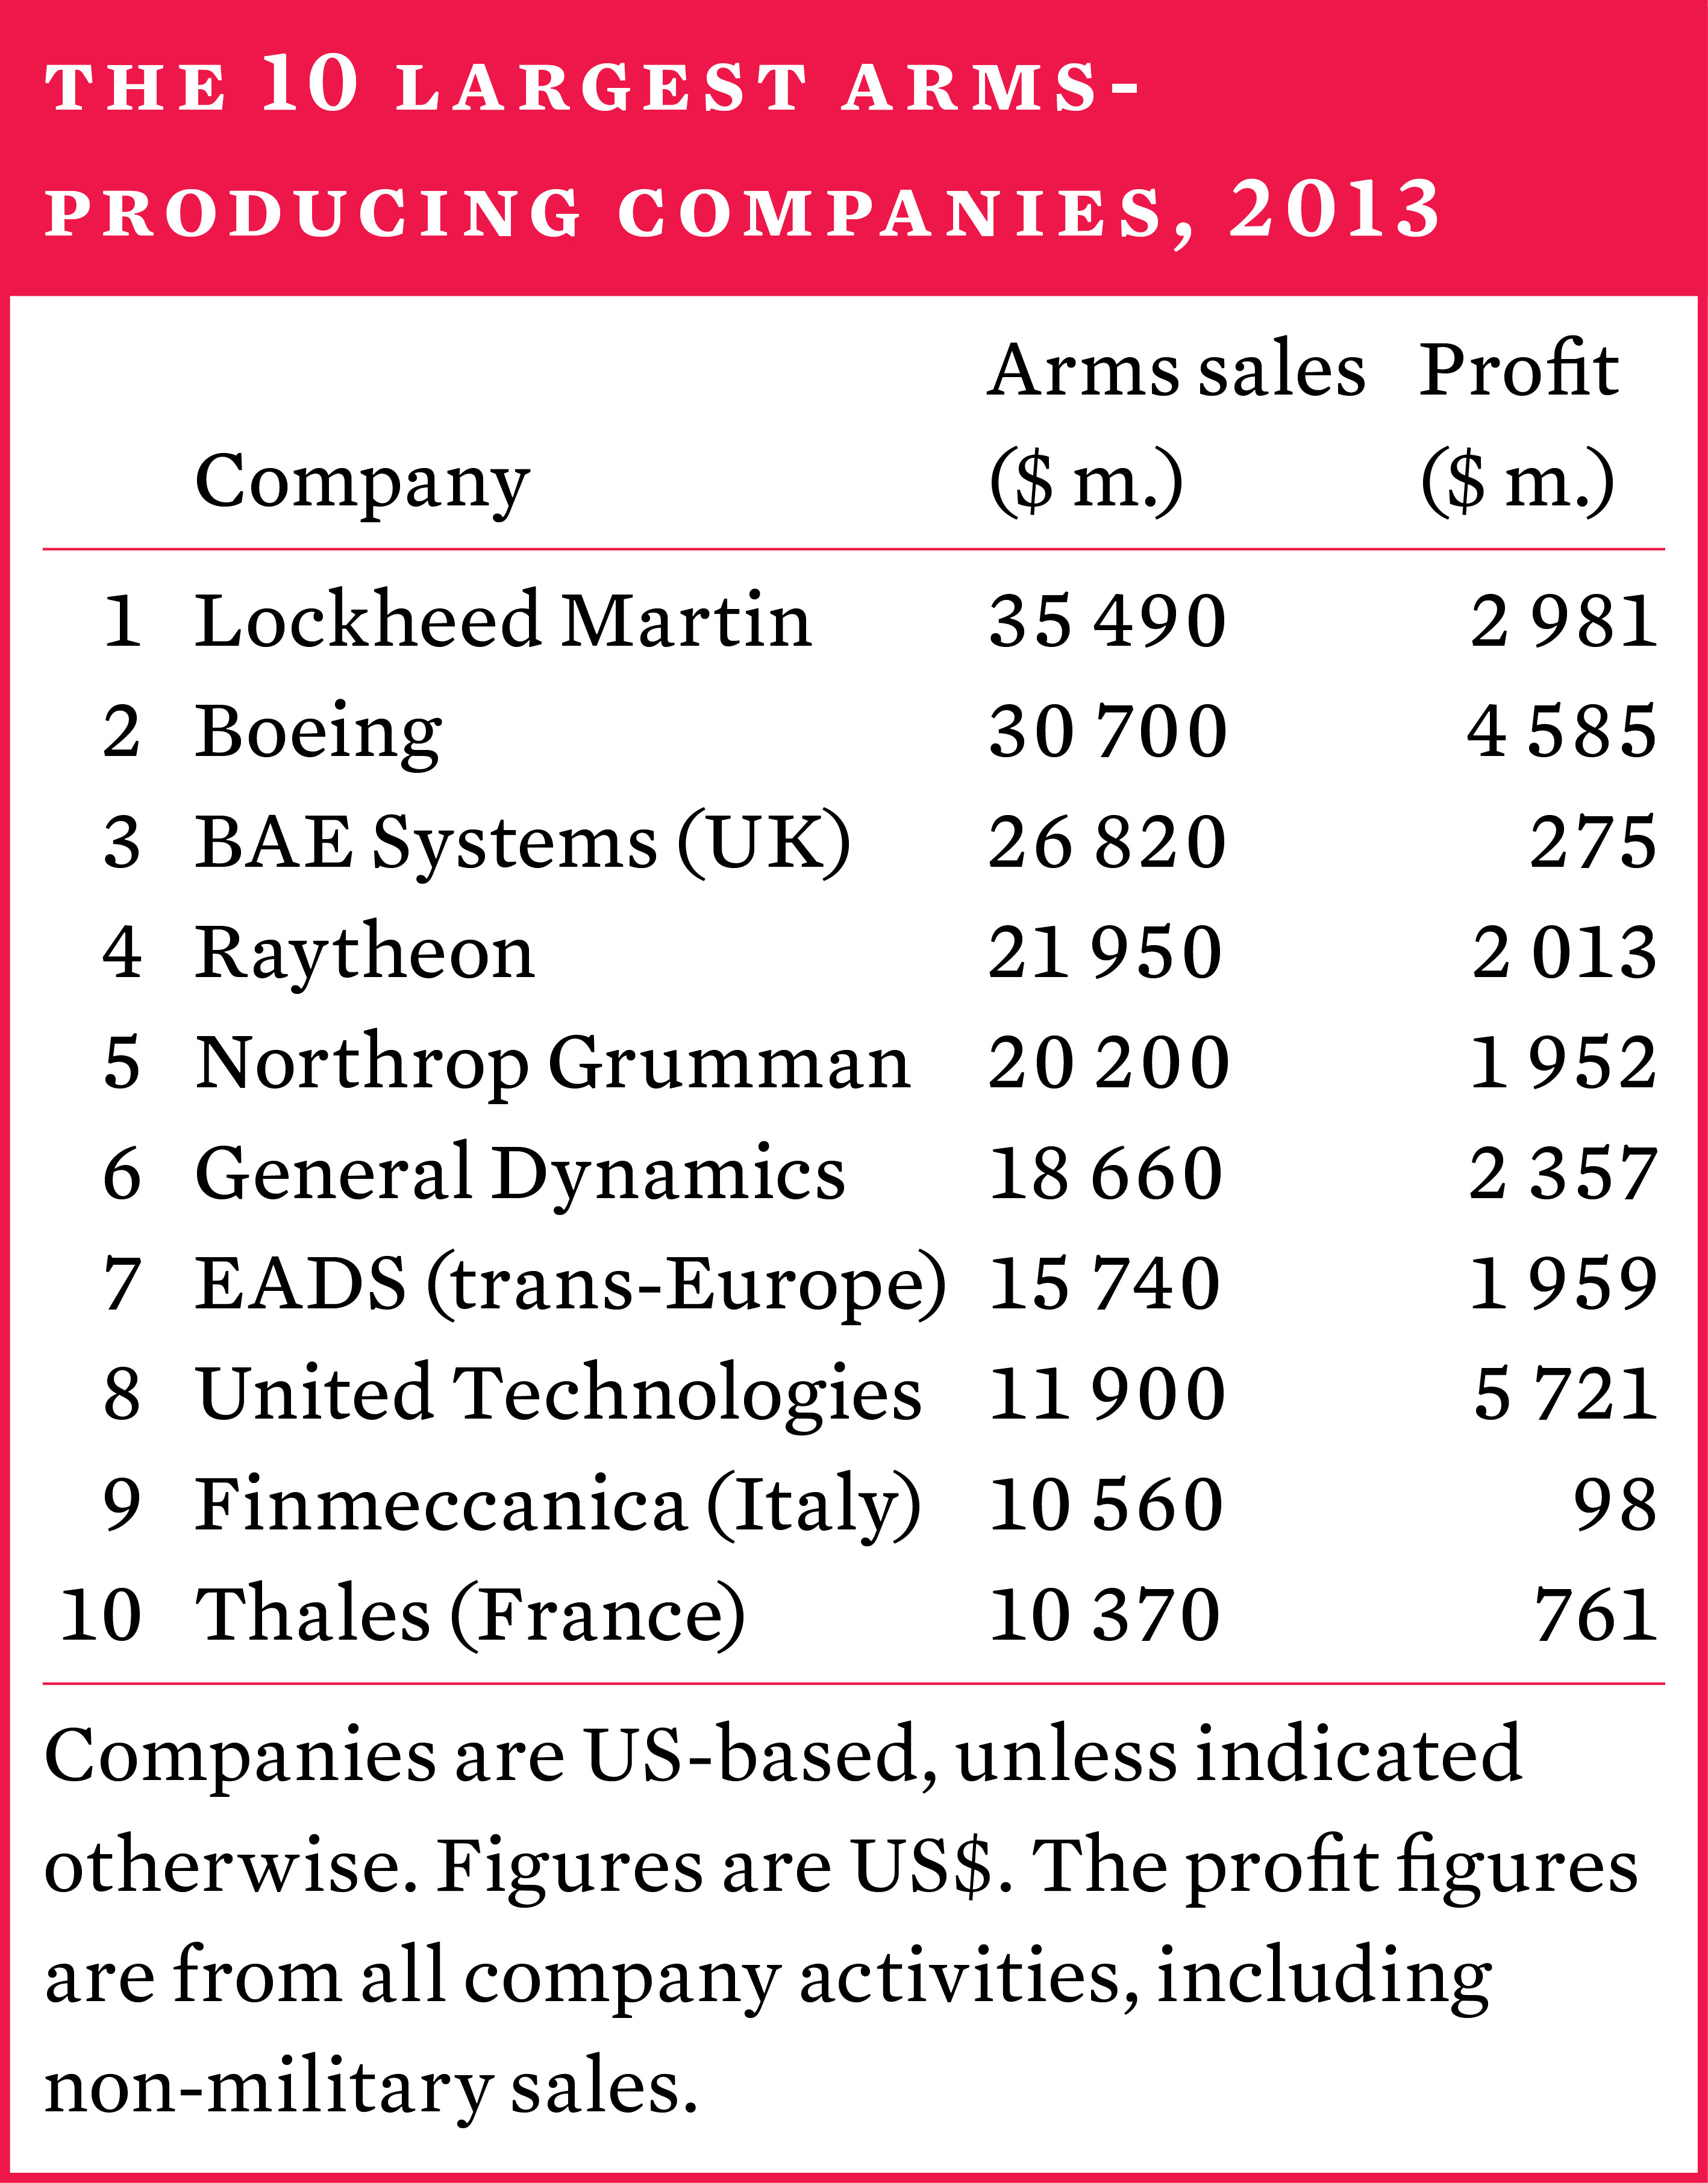 The 10 largest arms-producing companies, 2013